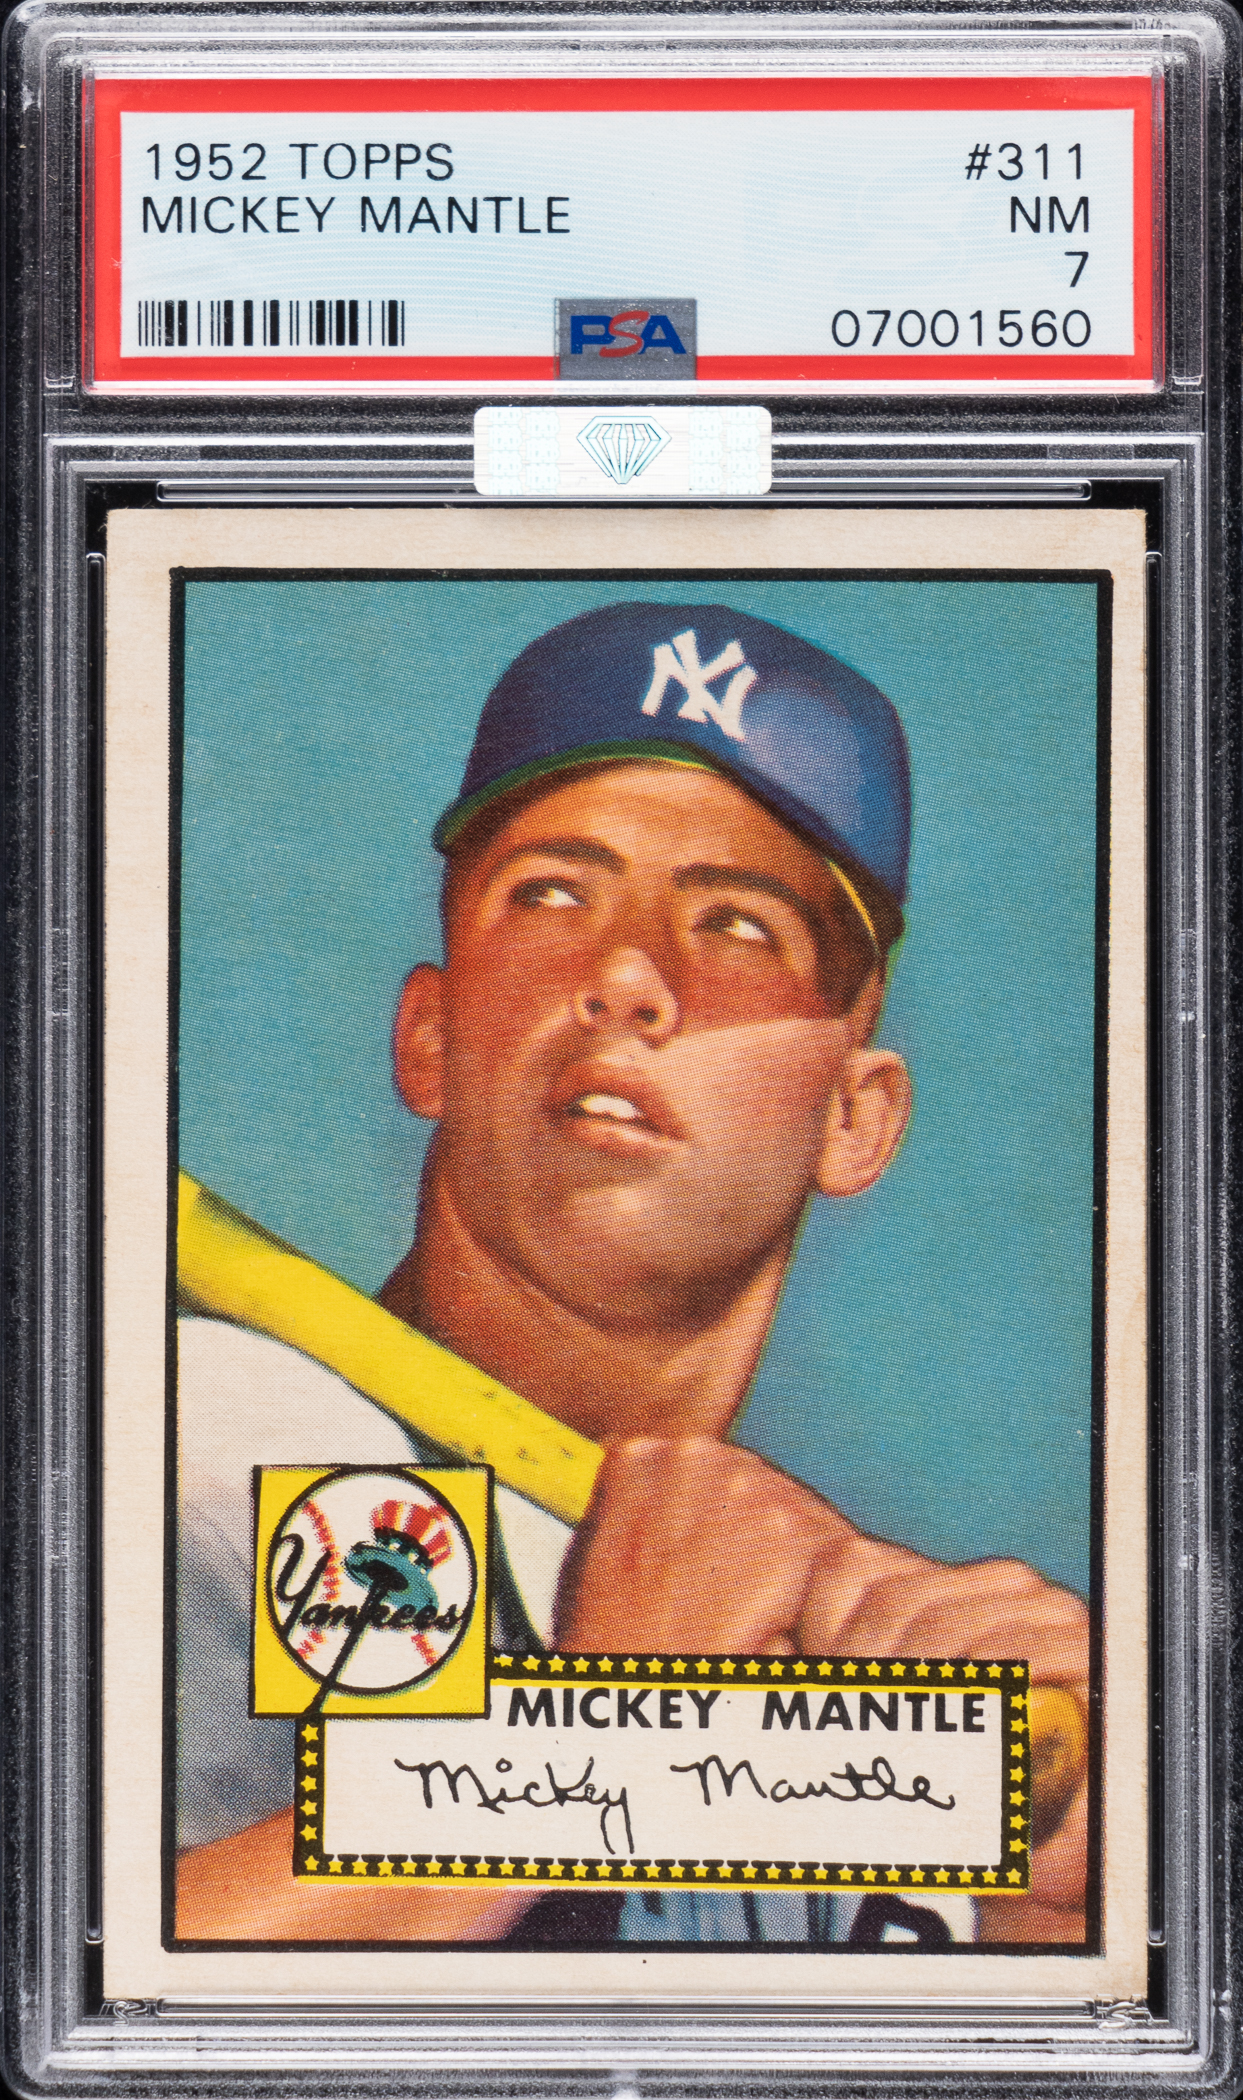 REA's Fall Auction featured a 1952 Topps Mickey Mantle PSA NM 7 that sold for $336,000